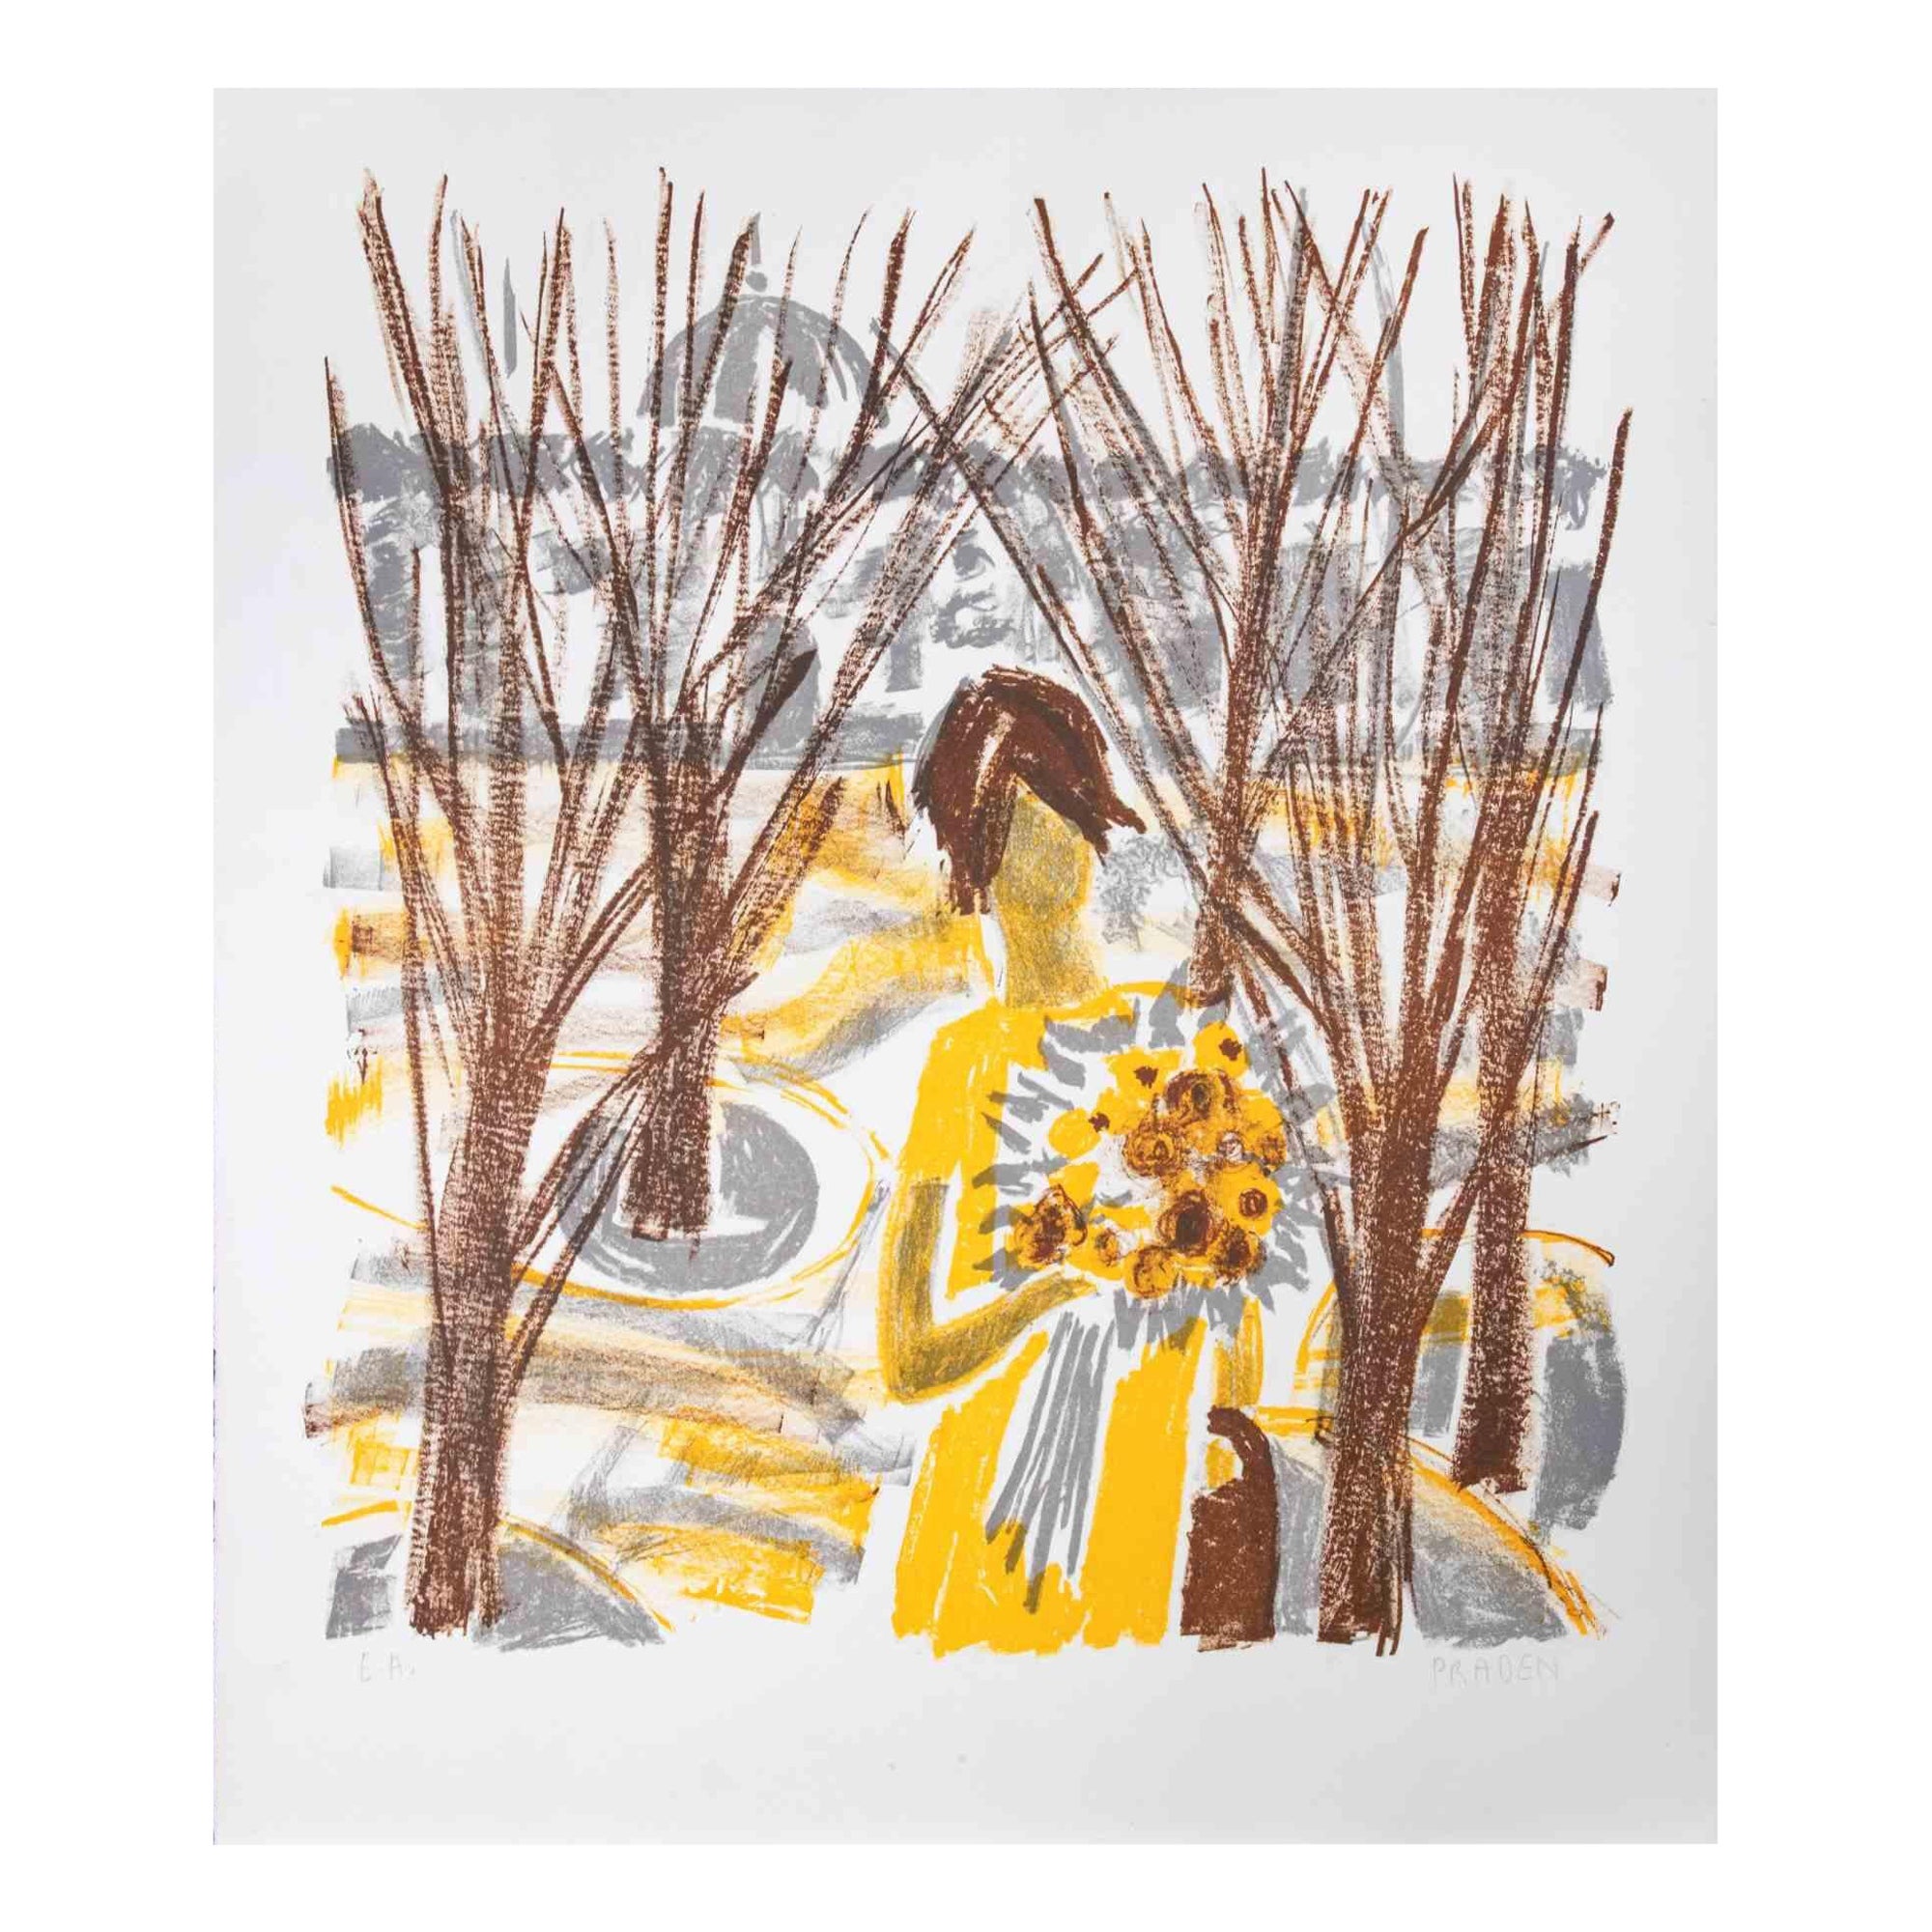 Woman With Flowers is a lithograph realized by Nicole Praden (1933-2019).

Good condition on a white cardboard.

Hand-signed with pencil on the lower right corner.